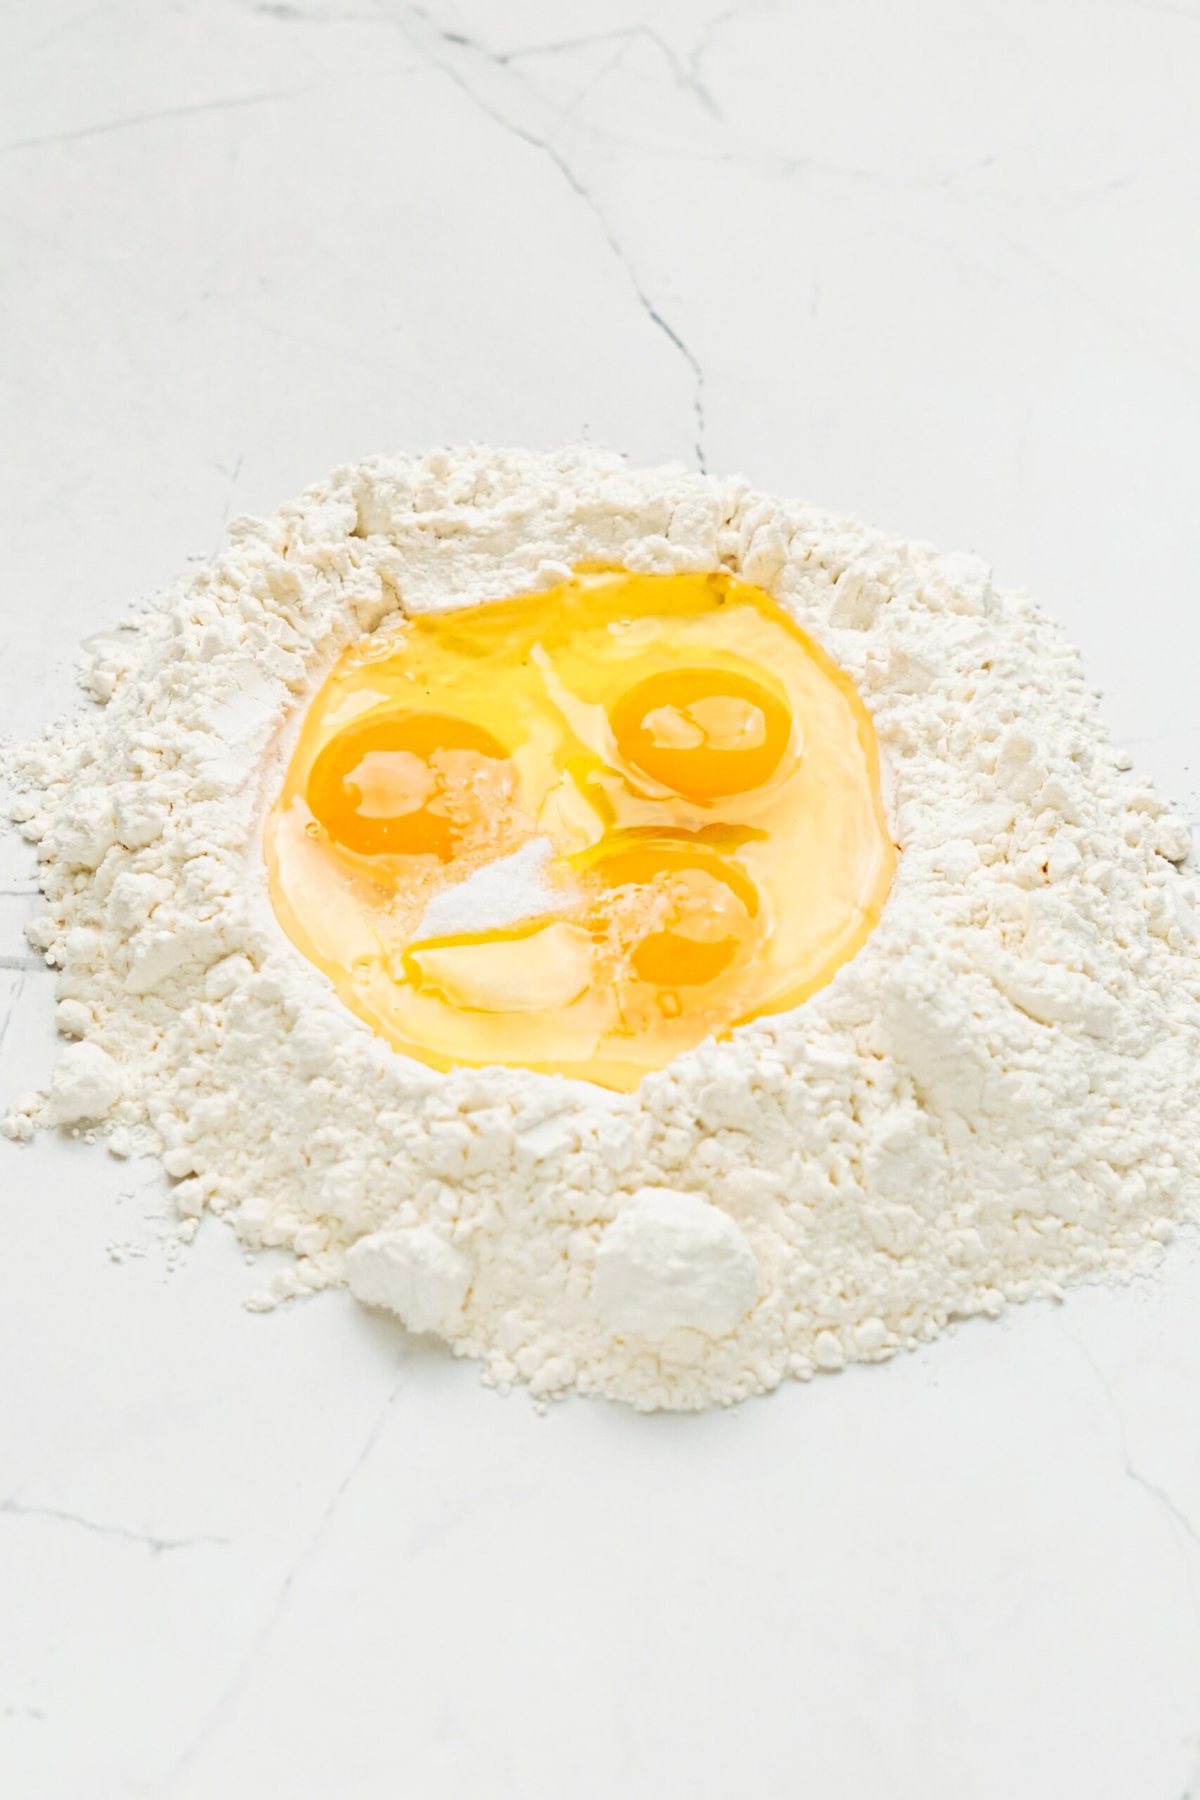 Eggs in the center of flour.